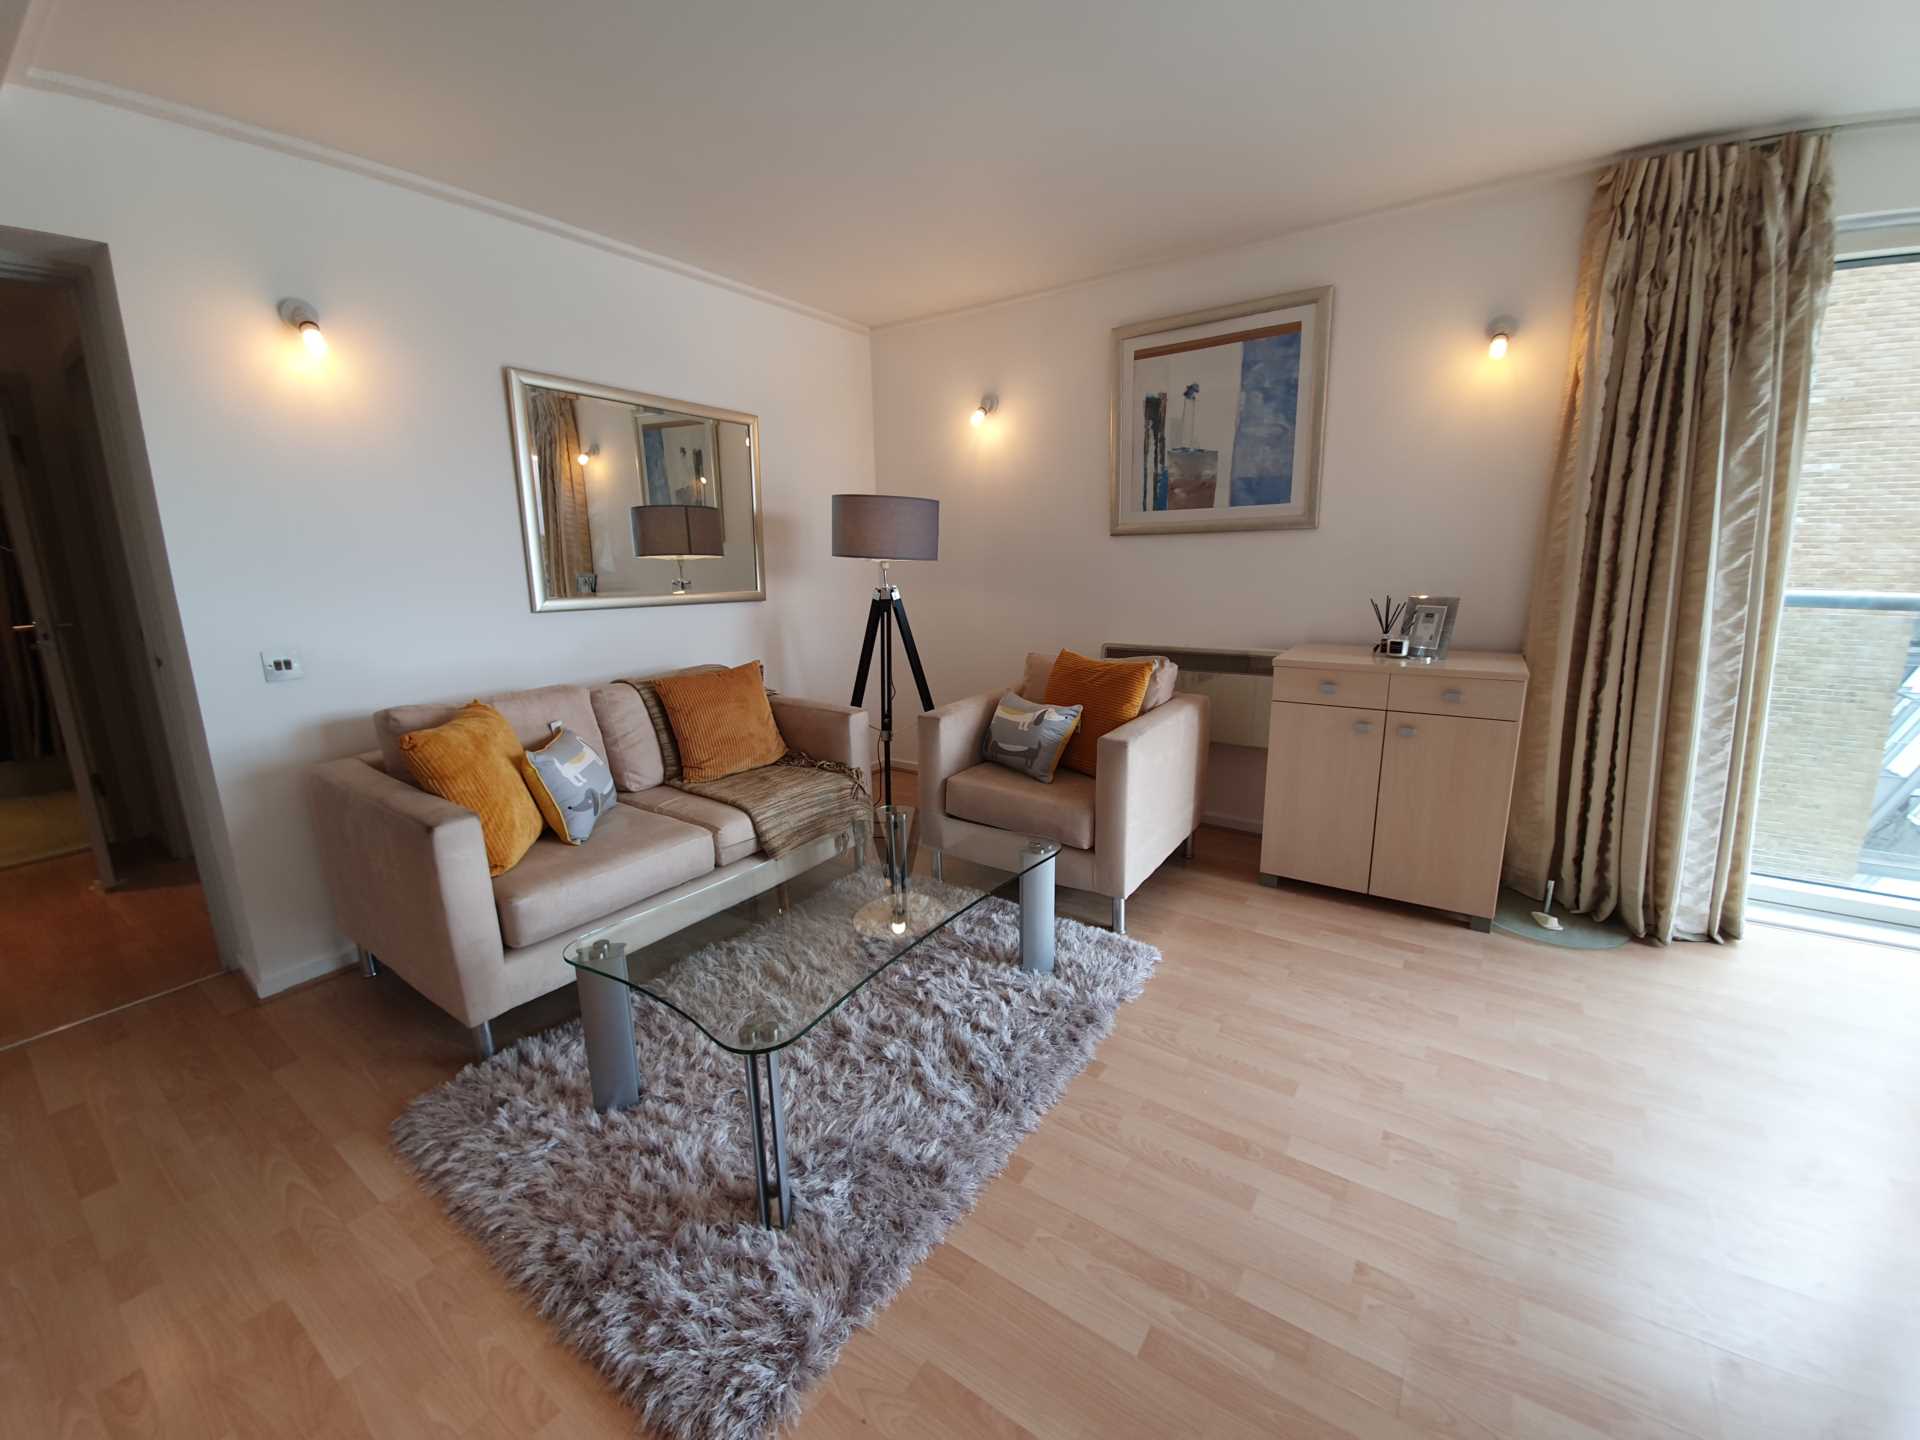 5th Floor, luxury one bedroom in Seacon Tower, E14 8JX, Image 8